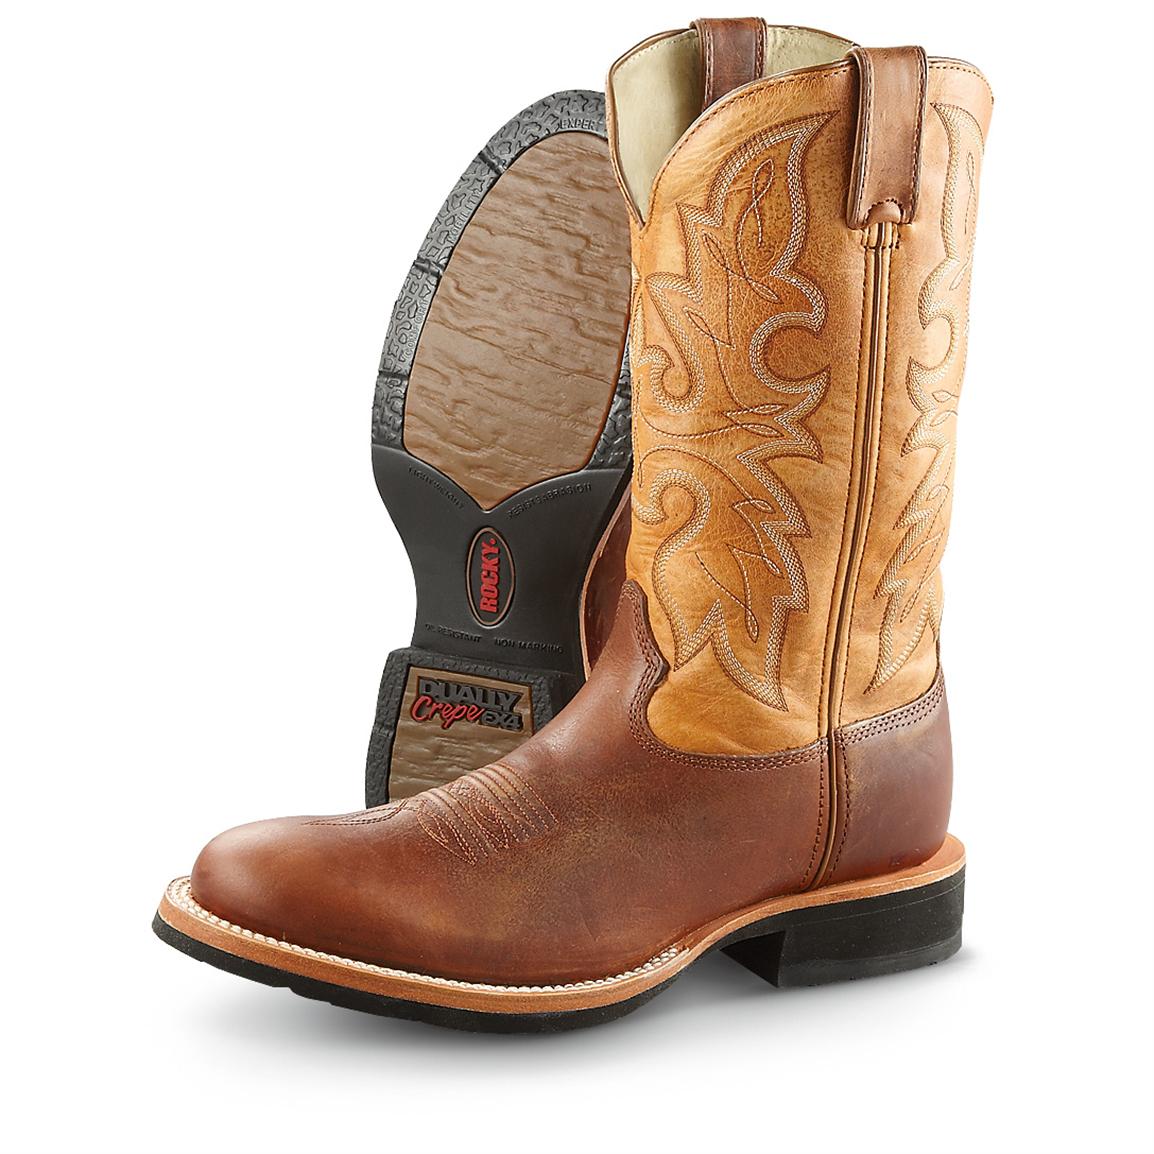 Men's Rocky® Dually Crepe EX4 Round Toe Western Work Boots, Rust ...